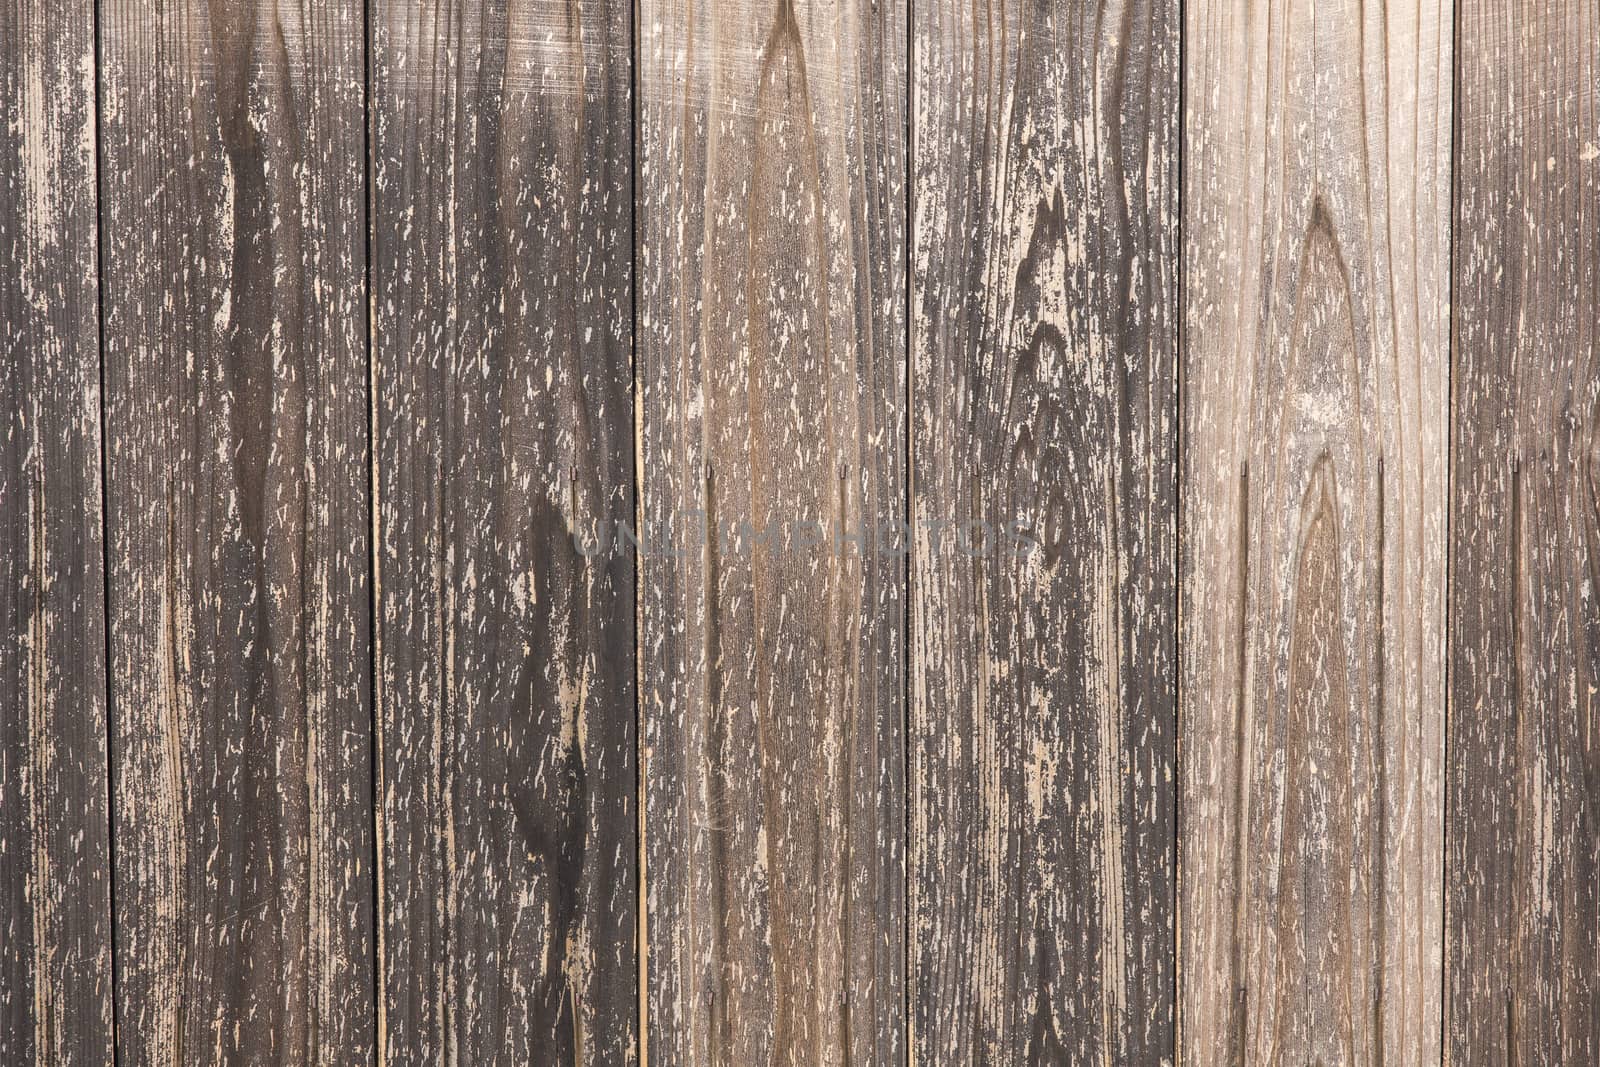 Old wood planks background and texture detail